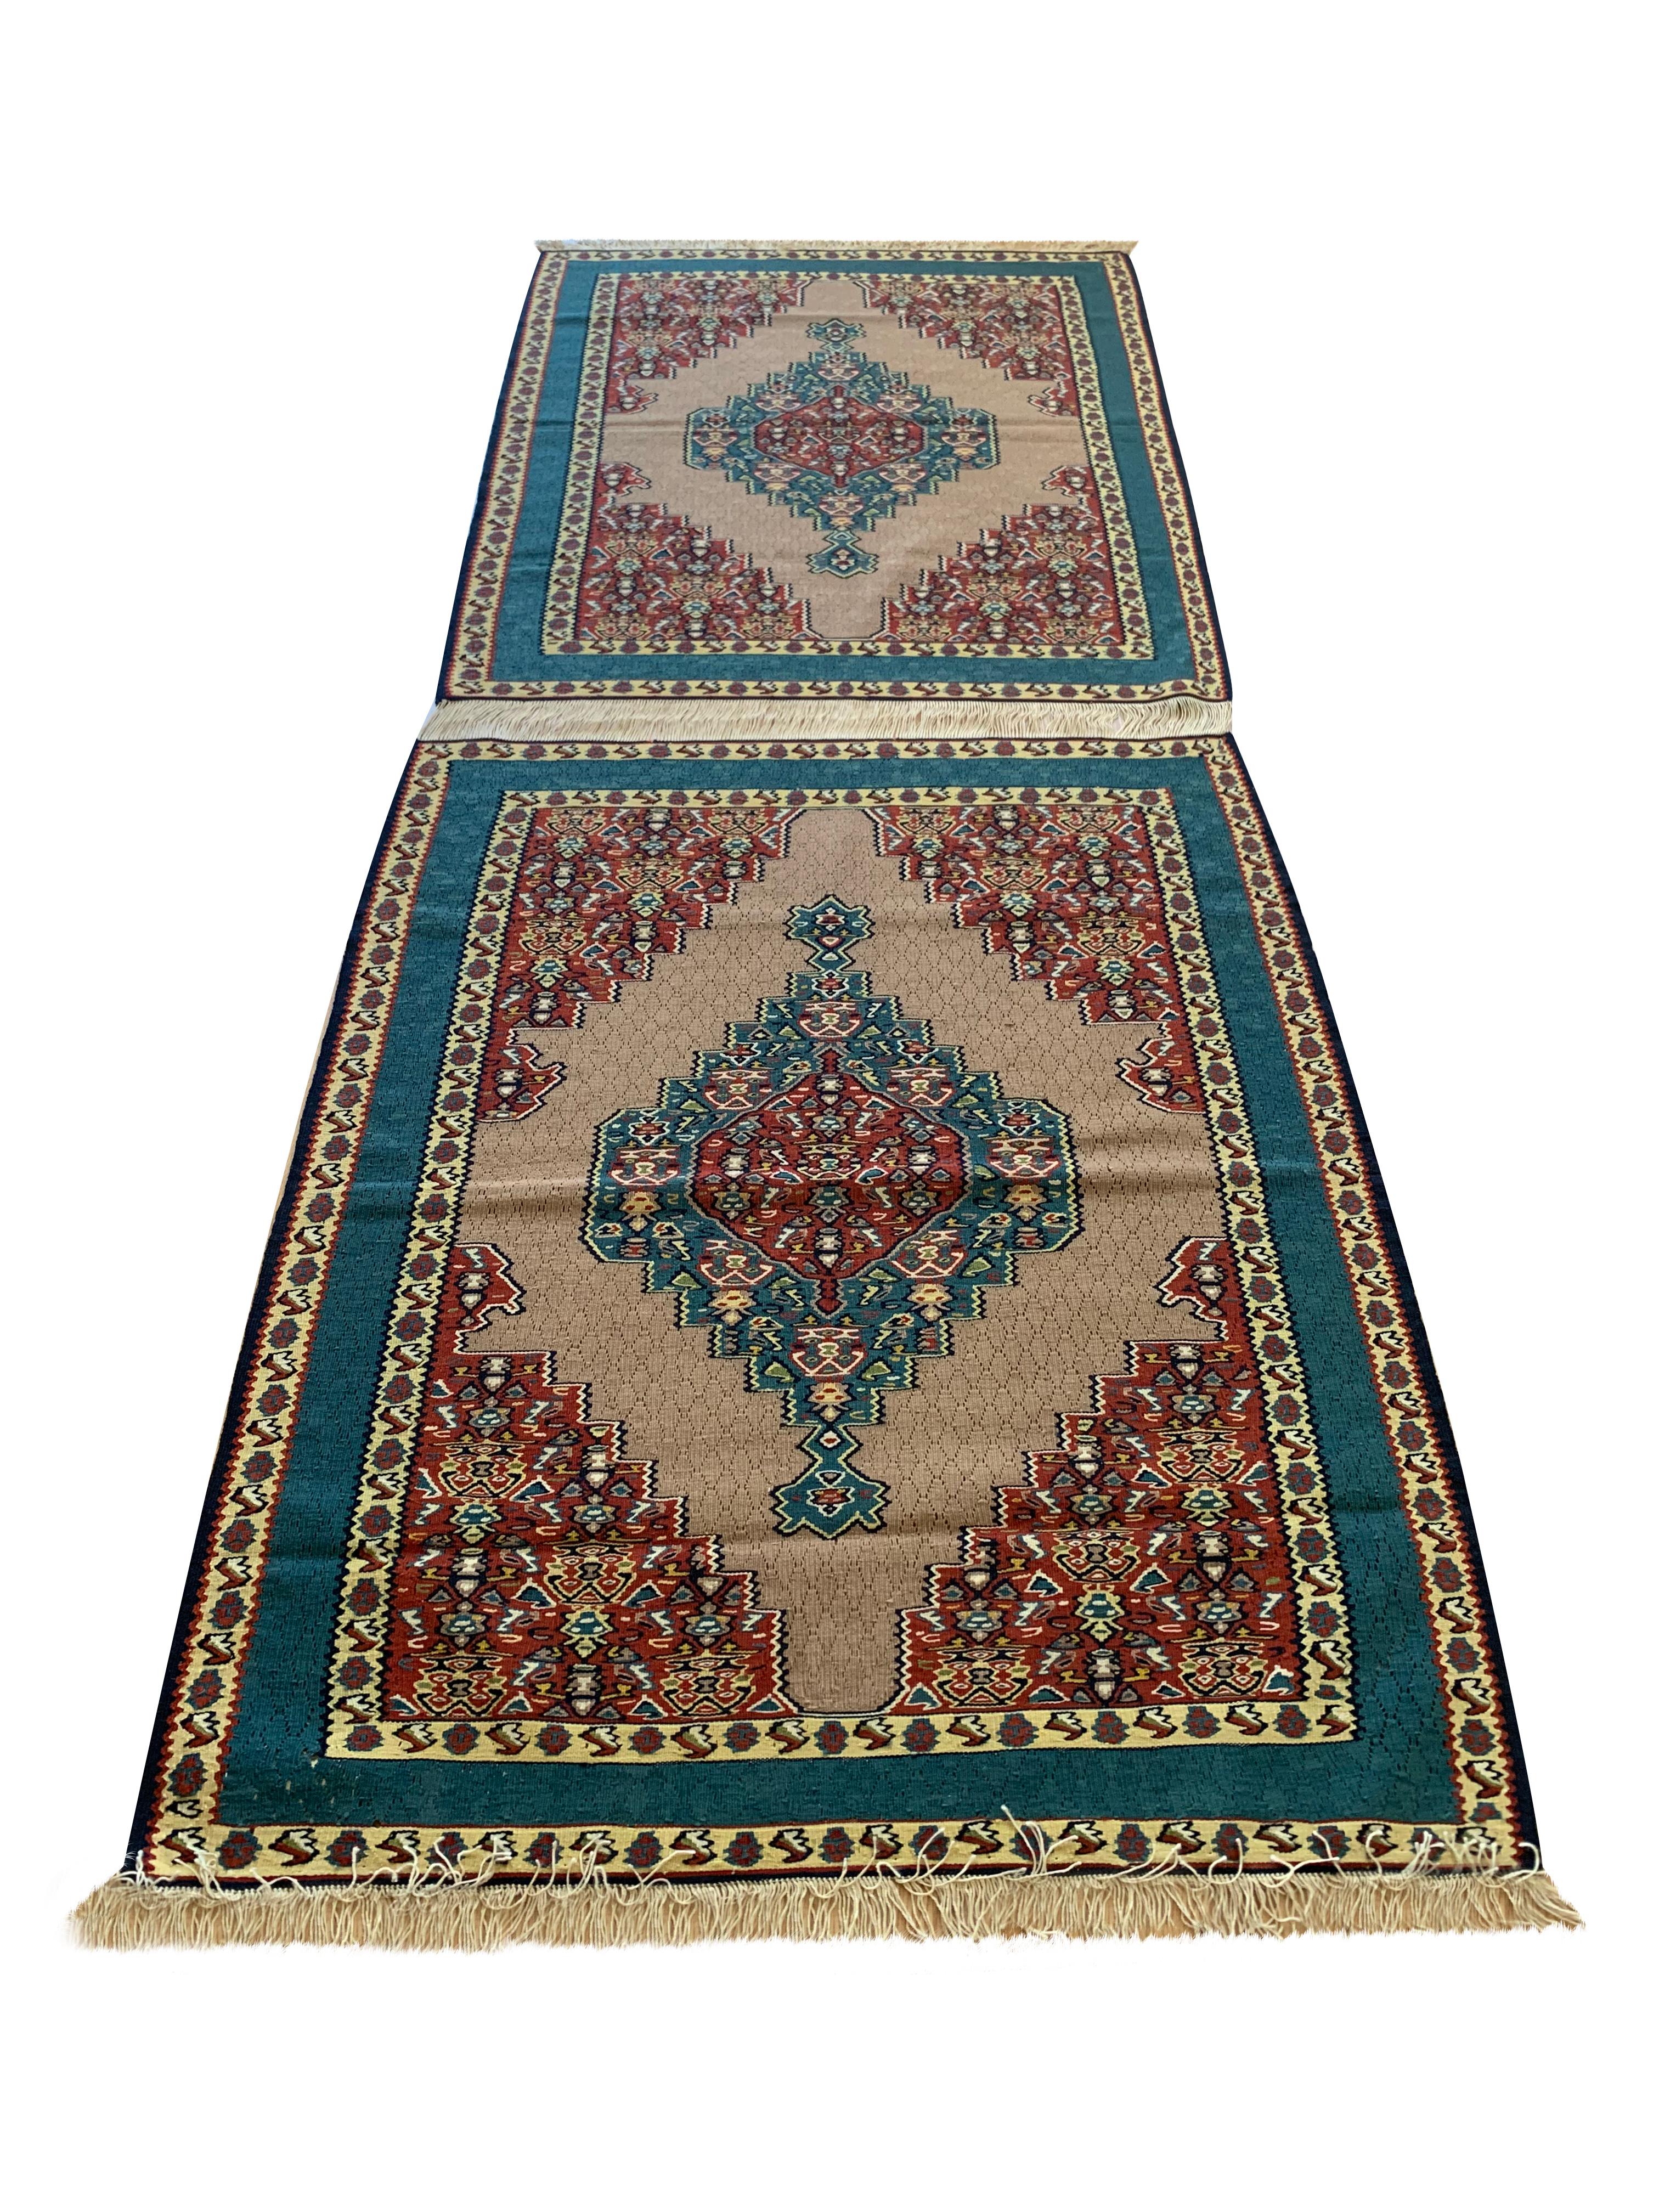 These beautifully handmade wool area rugs are new Kurdish kilim rugs woven in the early 2000s, circa 2010. The central design is highly decorative, featuring geometric medallions woven in broad red and indigo accents on a beige background. The